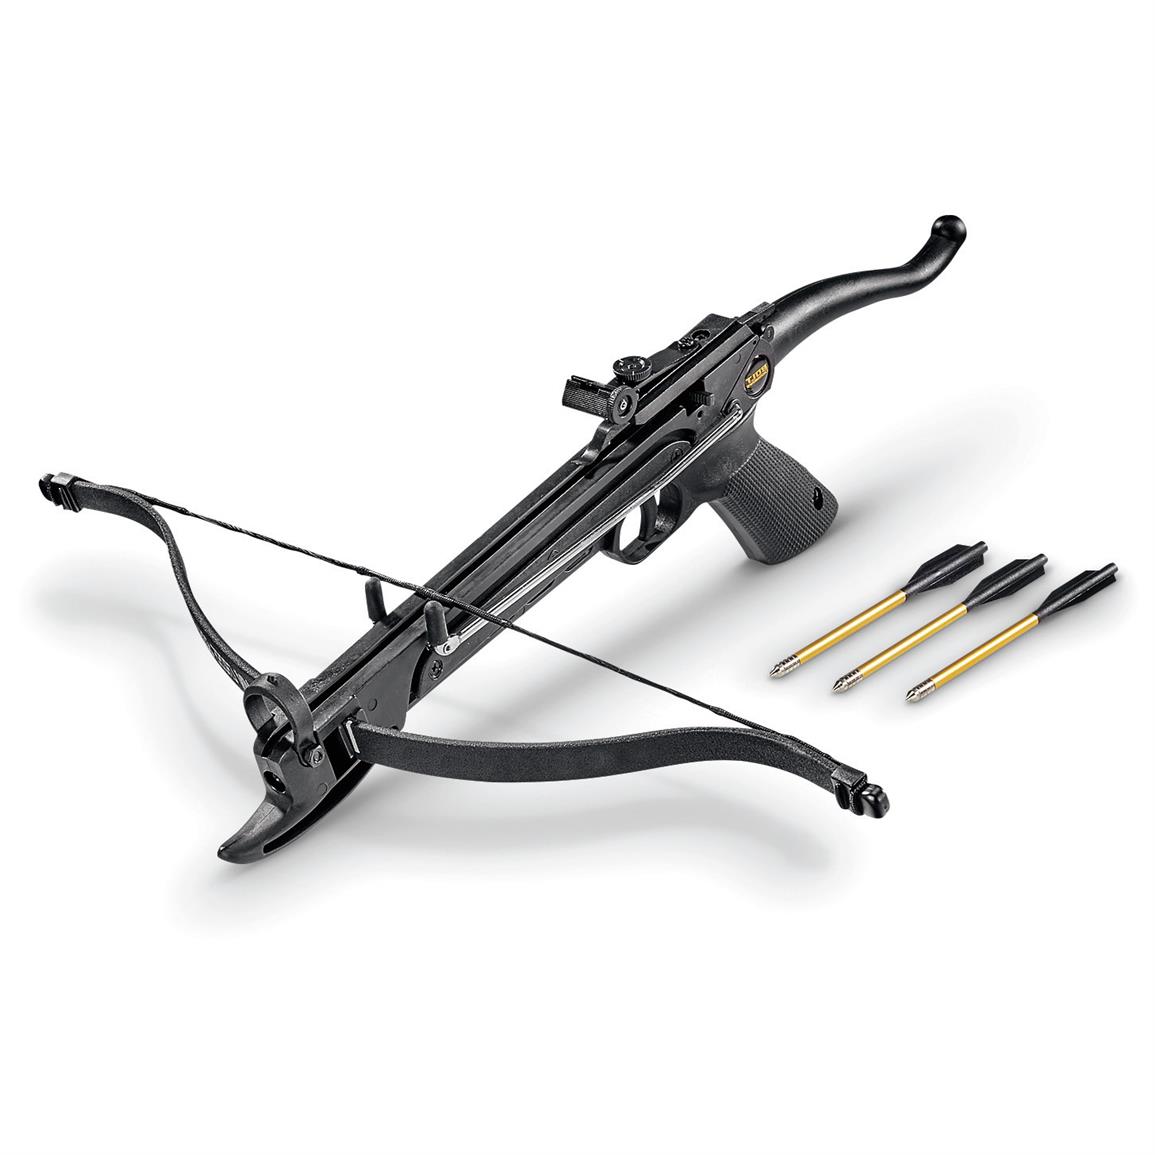 Pistol Crossbow, 80lb. Draw Weight 653682, Crossbows at Sportsman's